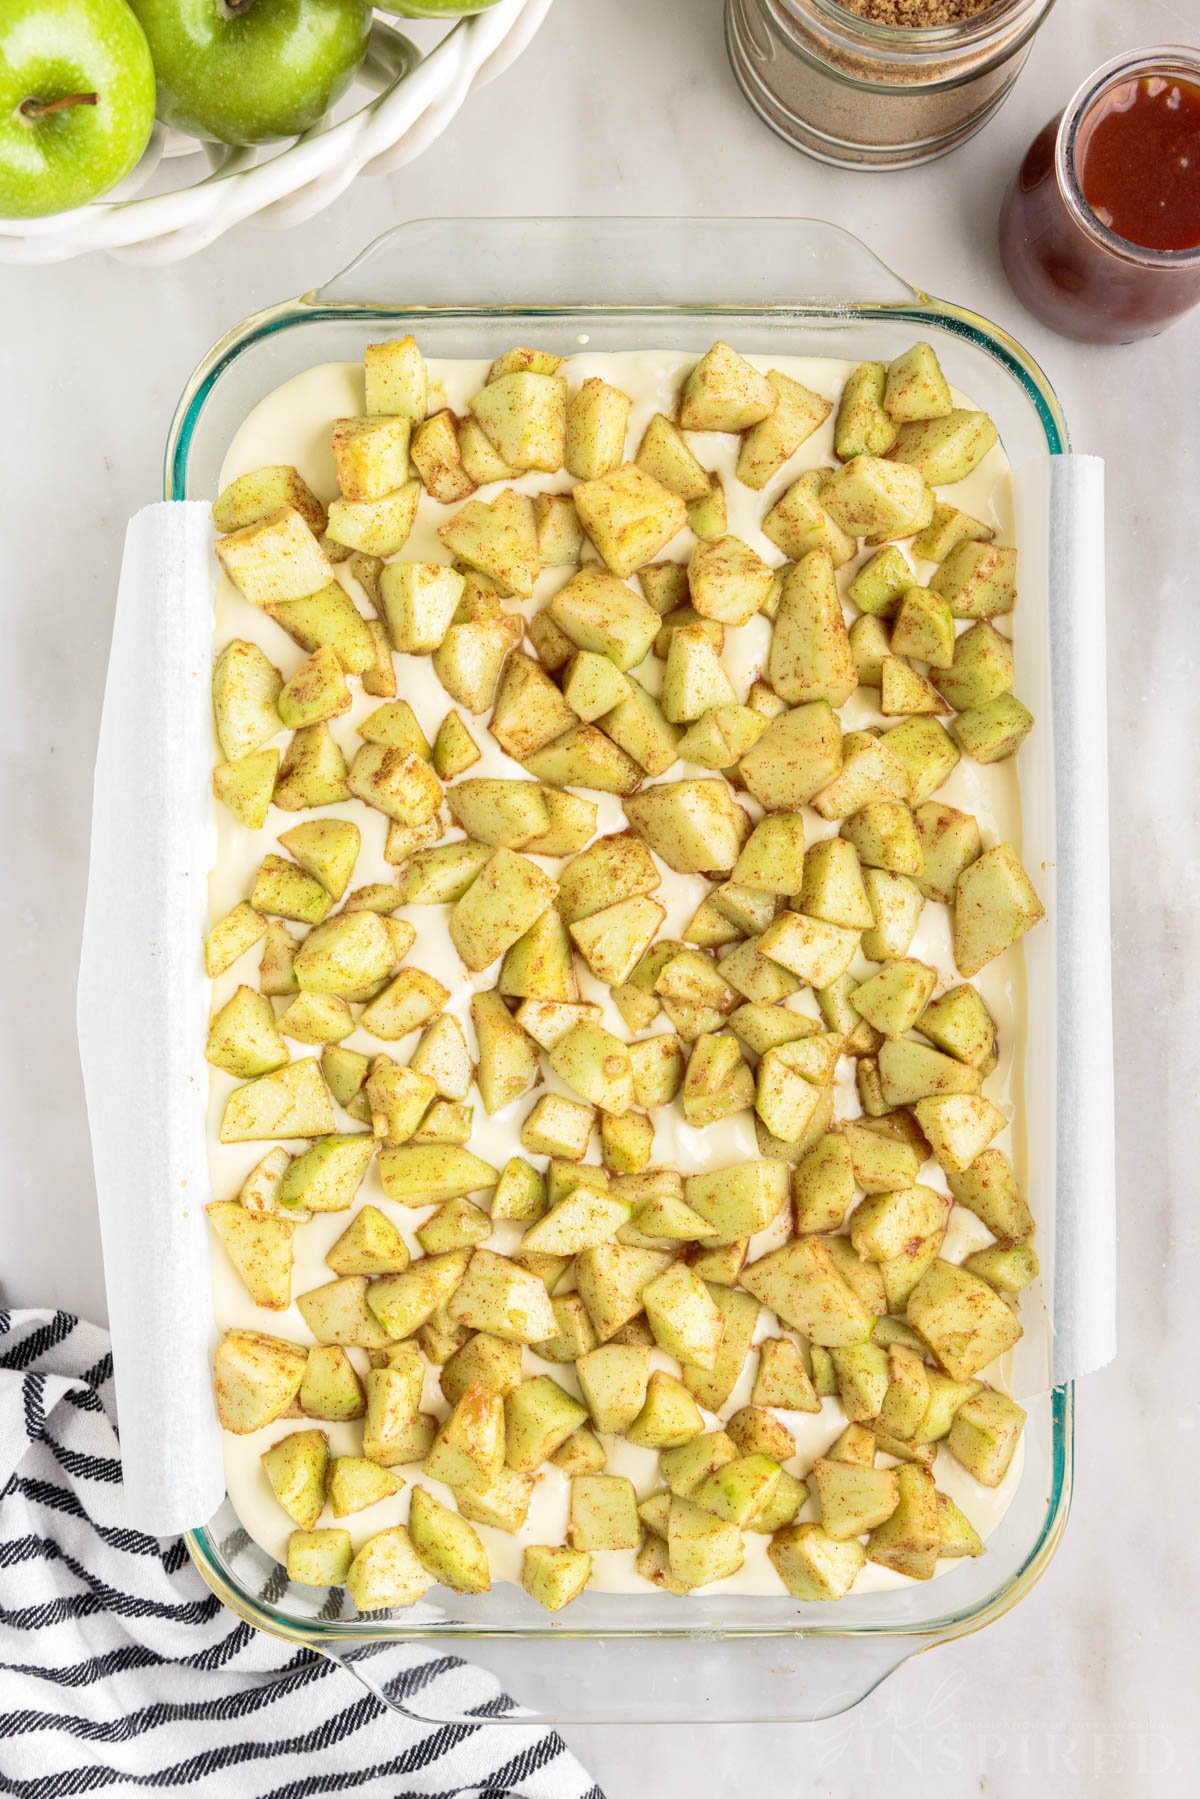 Diced and seasoned apple chunks sprinkled over cheesecake filling in the baking dish.